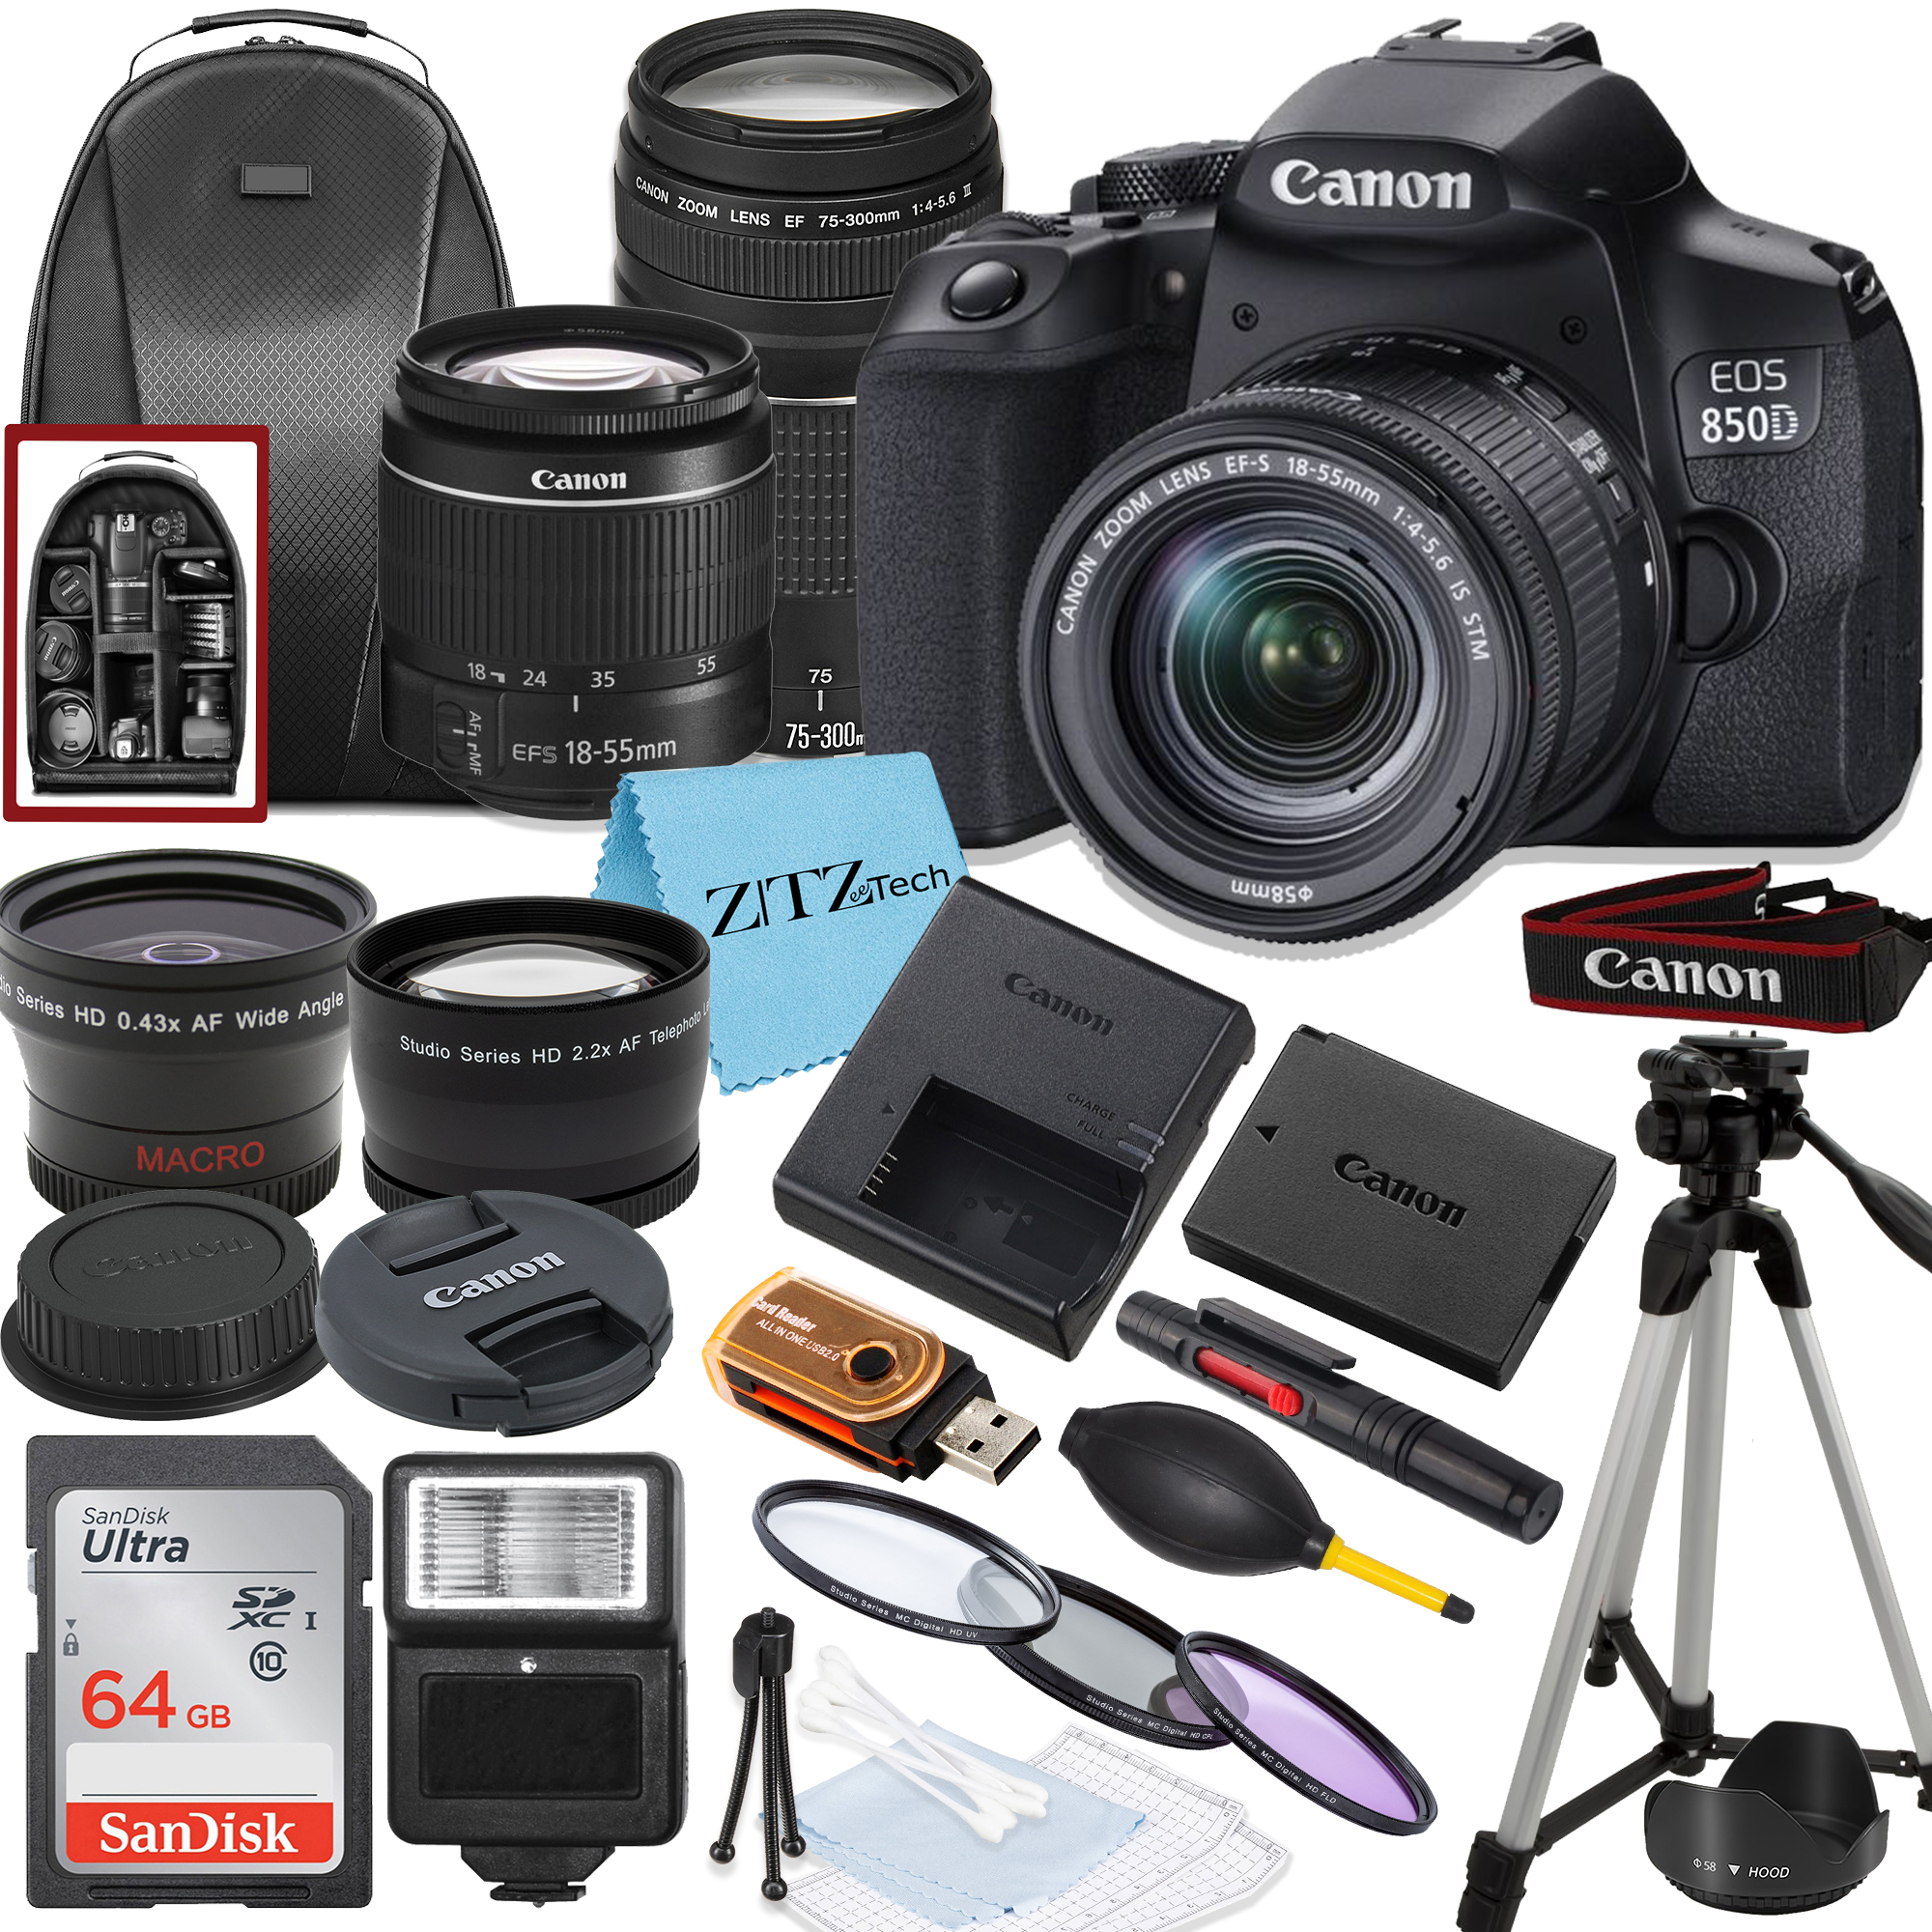 Canon EOS 850D / Rebel T8i DSLR Camera Bundle with 18-55mm, 75-300mm Lens, SanDisk 64GB Card, Backpack and ZeeTech Accessory